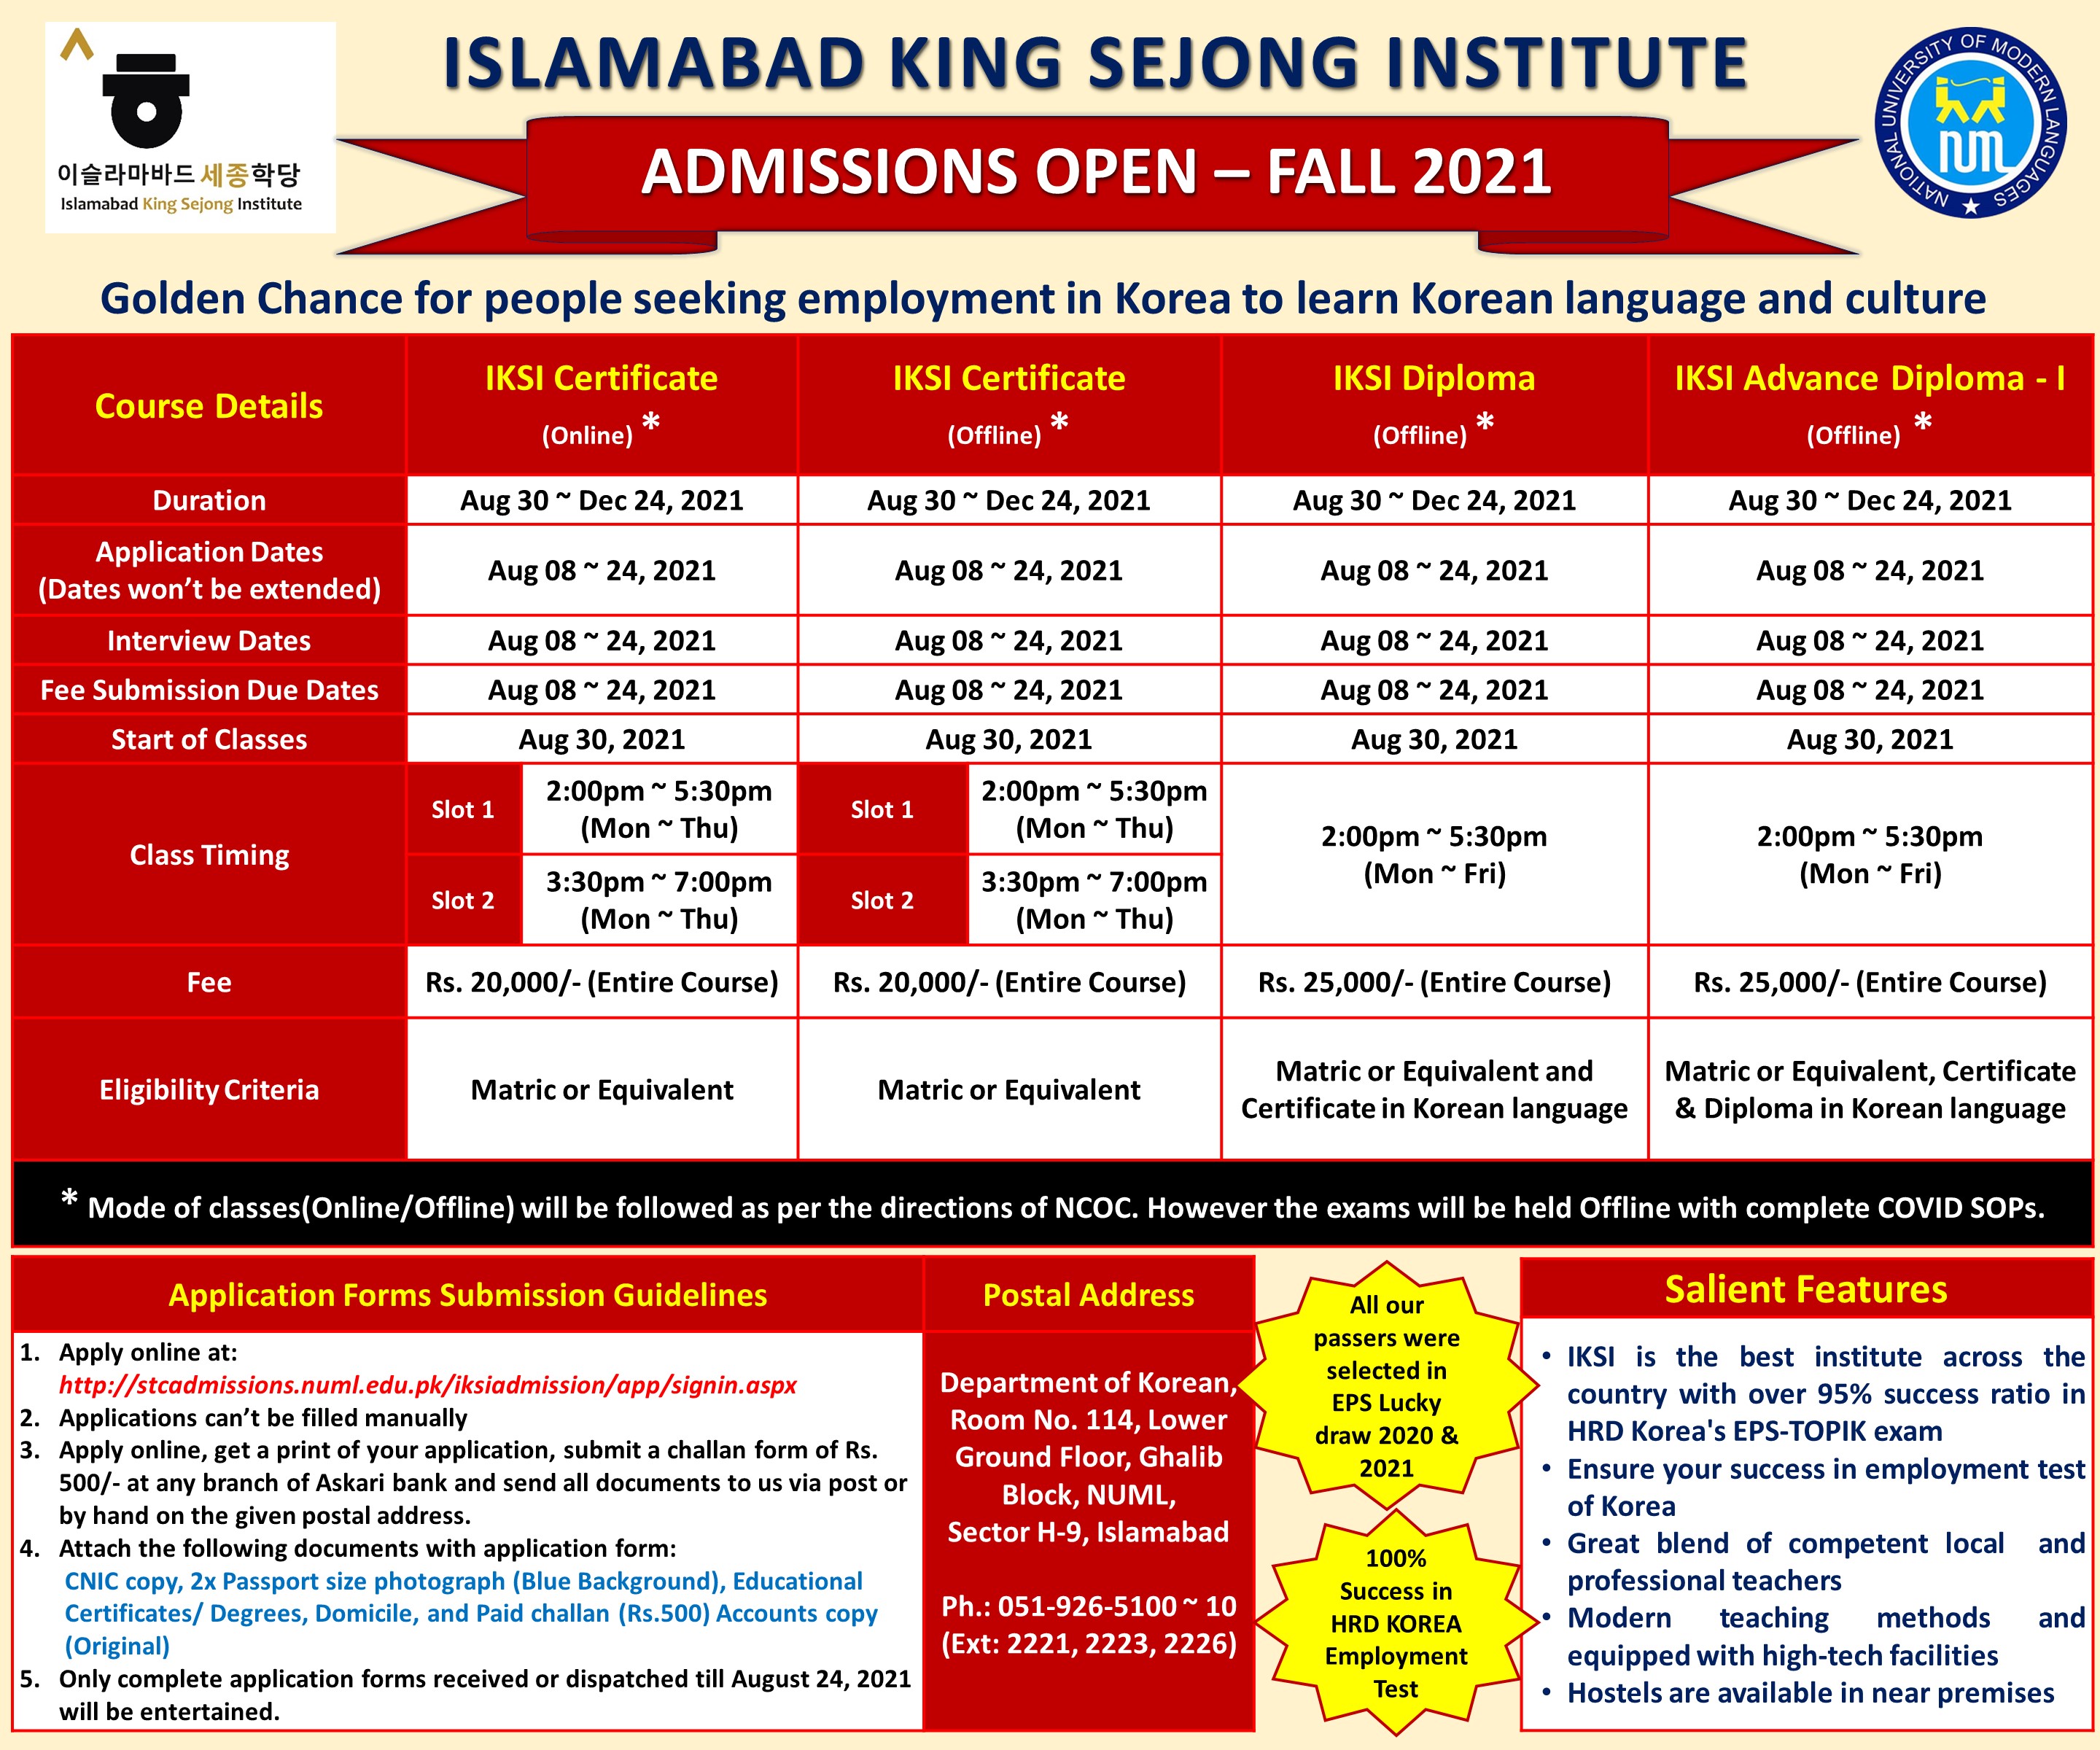 ISLAMABAD KING SEJONG INSTITUTE - FALL 2021 ADMISSION OPEN